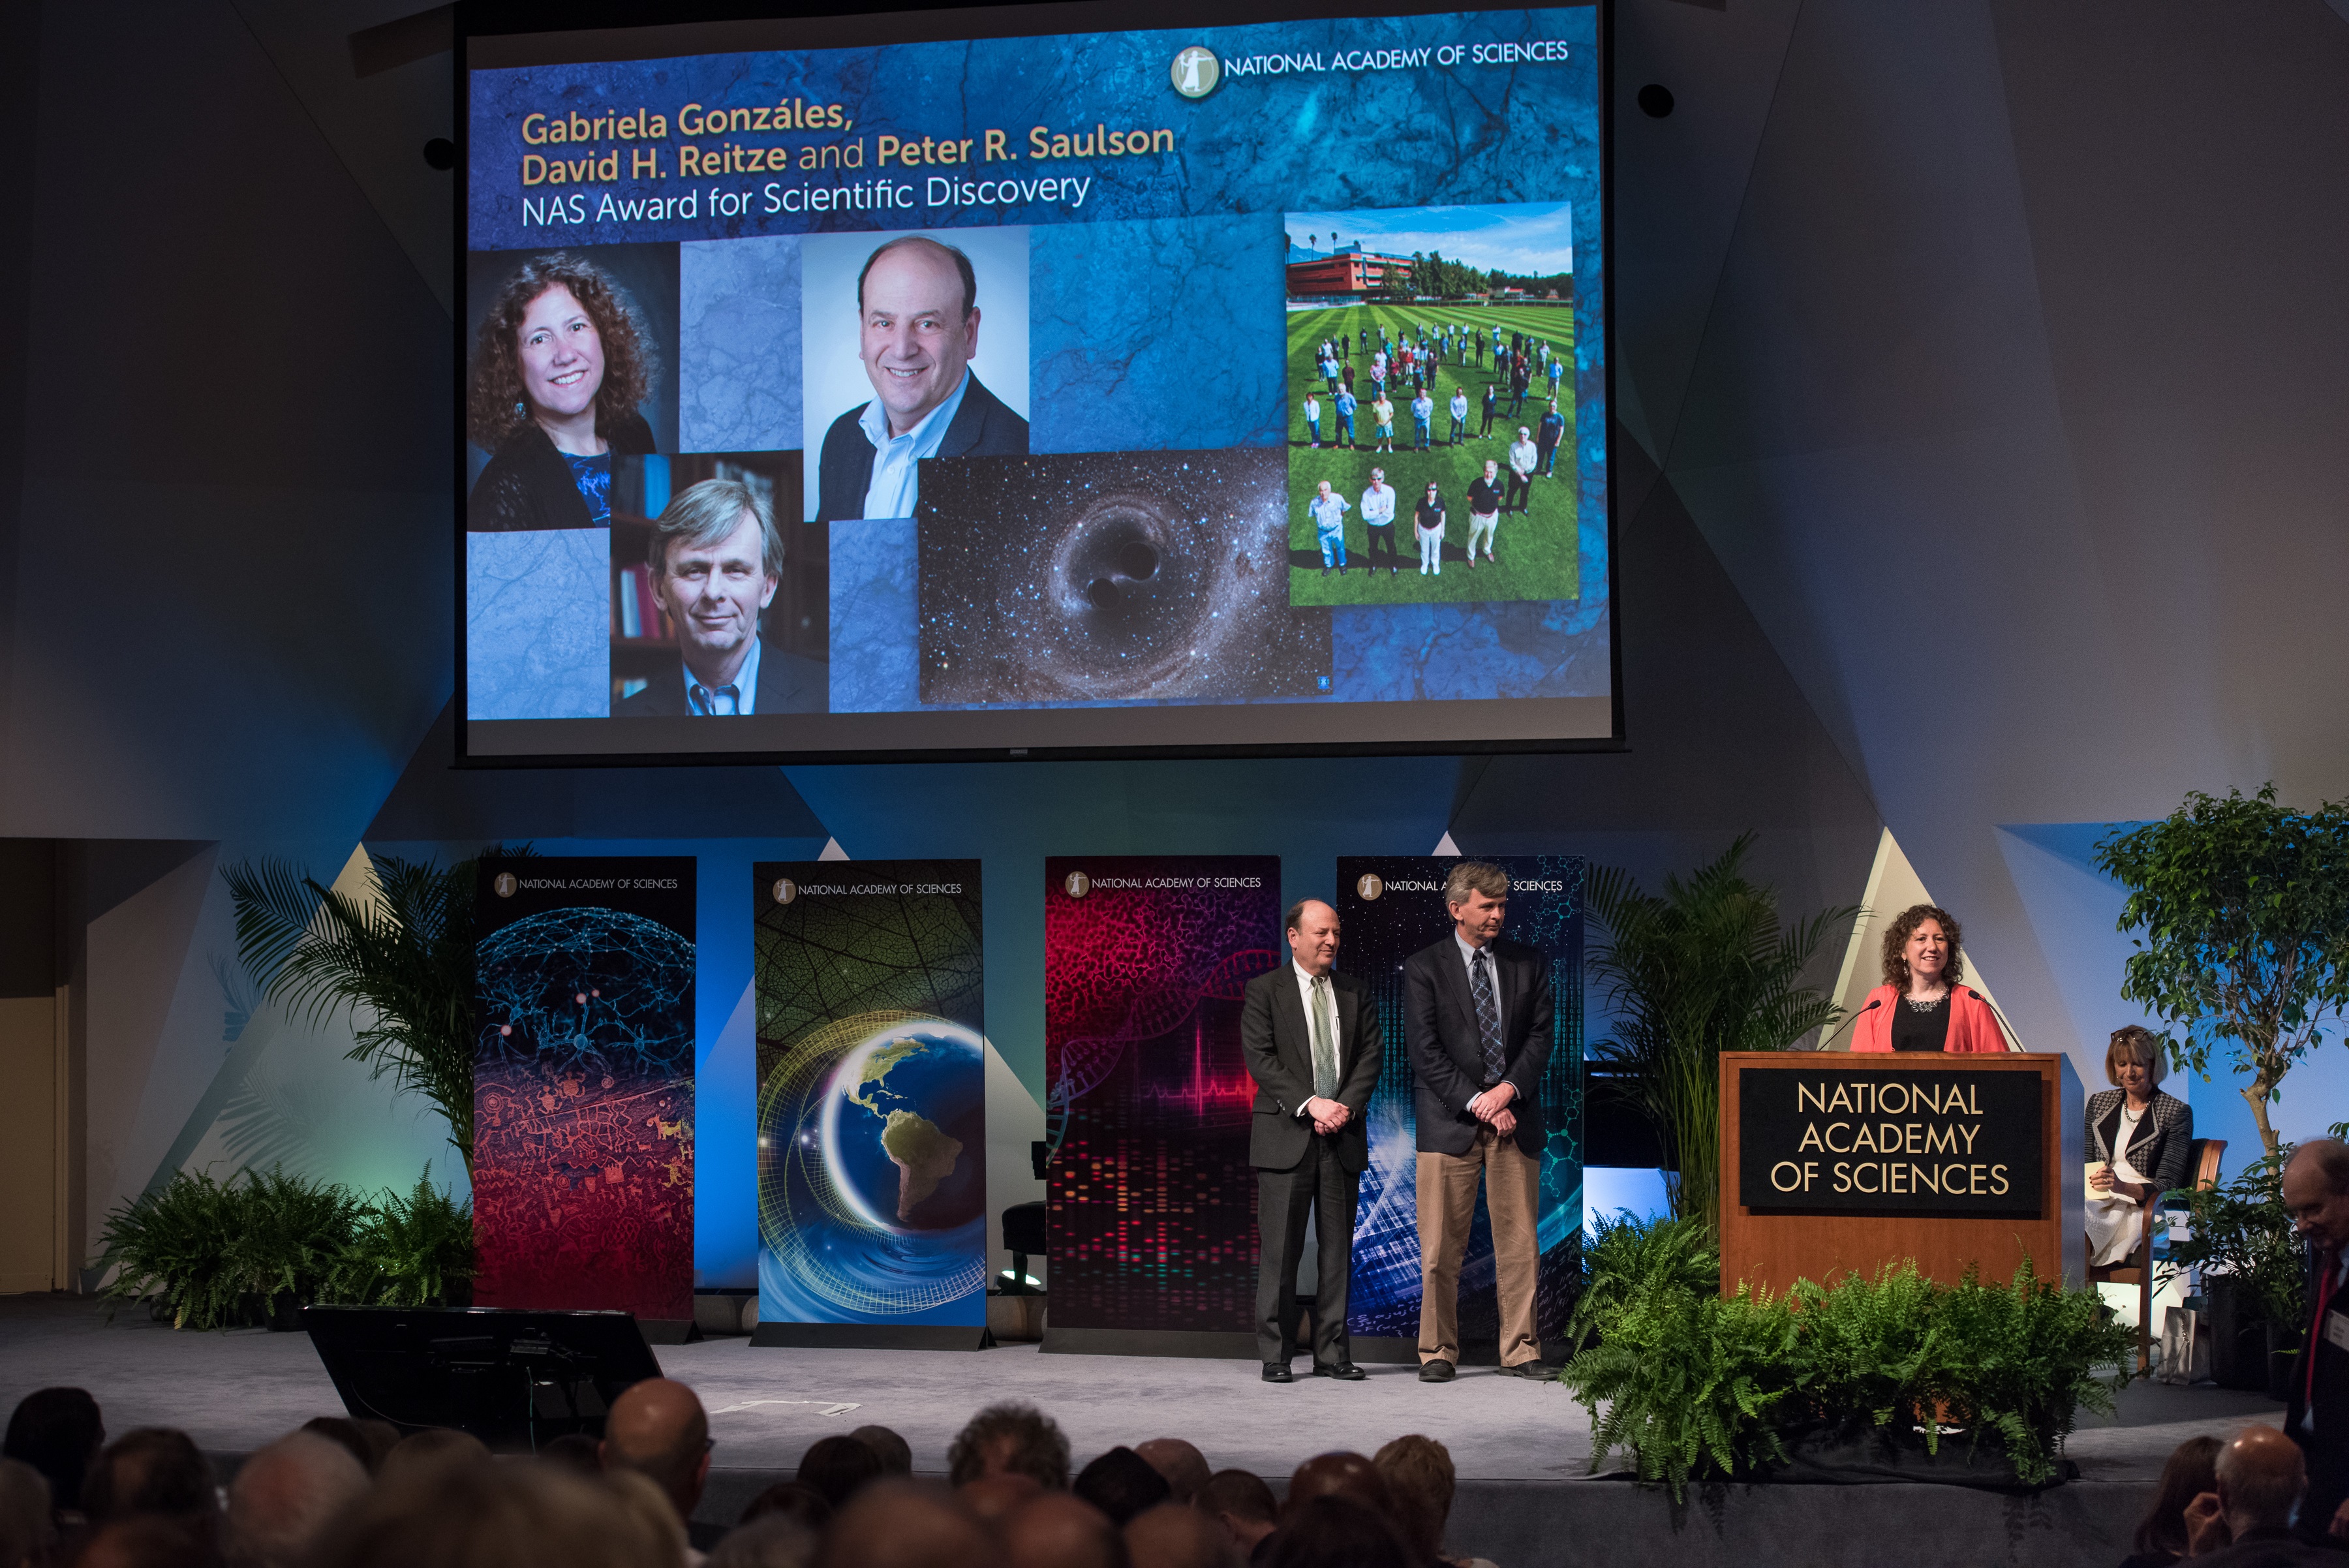 Gabriela Gonzalez received the National Academy of Sciences award for Scientific Discovery